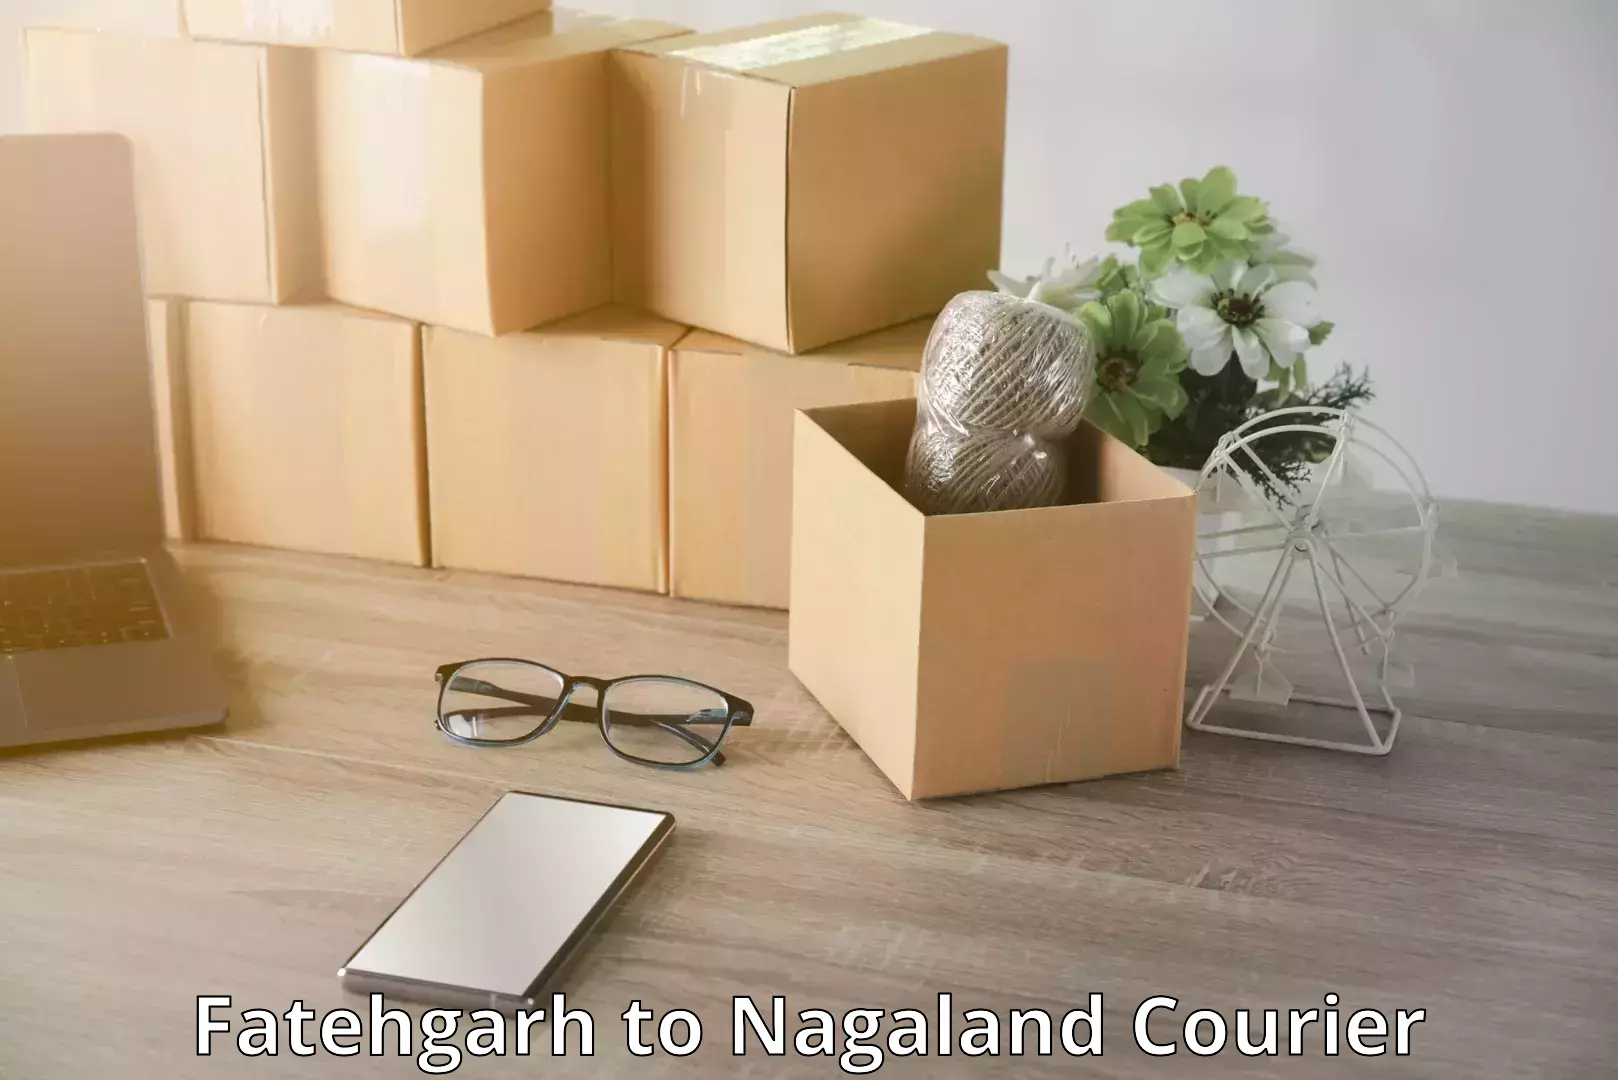 Luggage delivery app Fatehgarh to Nagaland